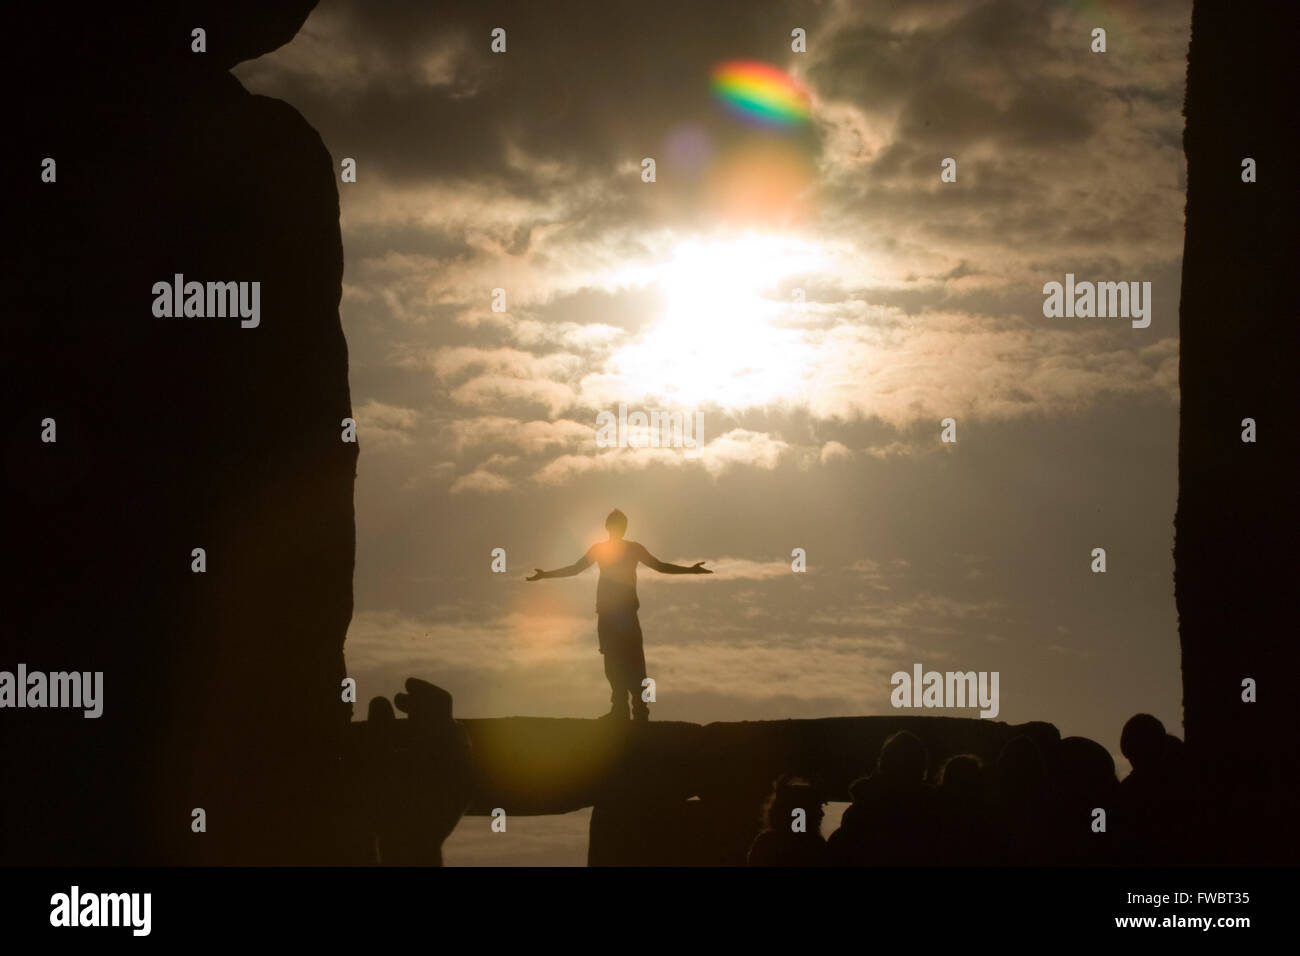 A reveller on top of one of the ancient stones of the Neolithic monument, Stonehenge in the UK as the sunrises ono the morning of the June 21st known as the midsummer solstice. Stock Photo